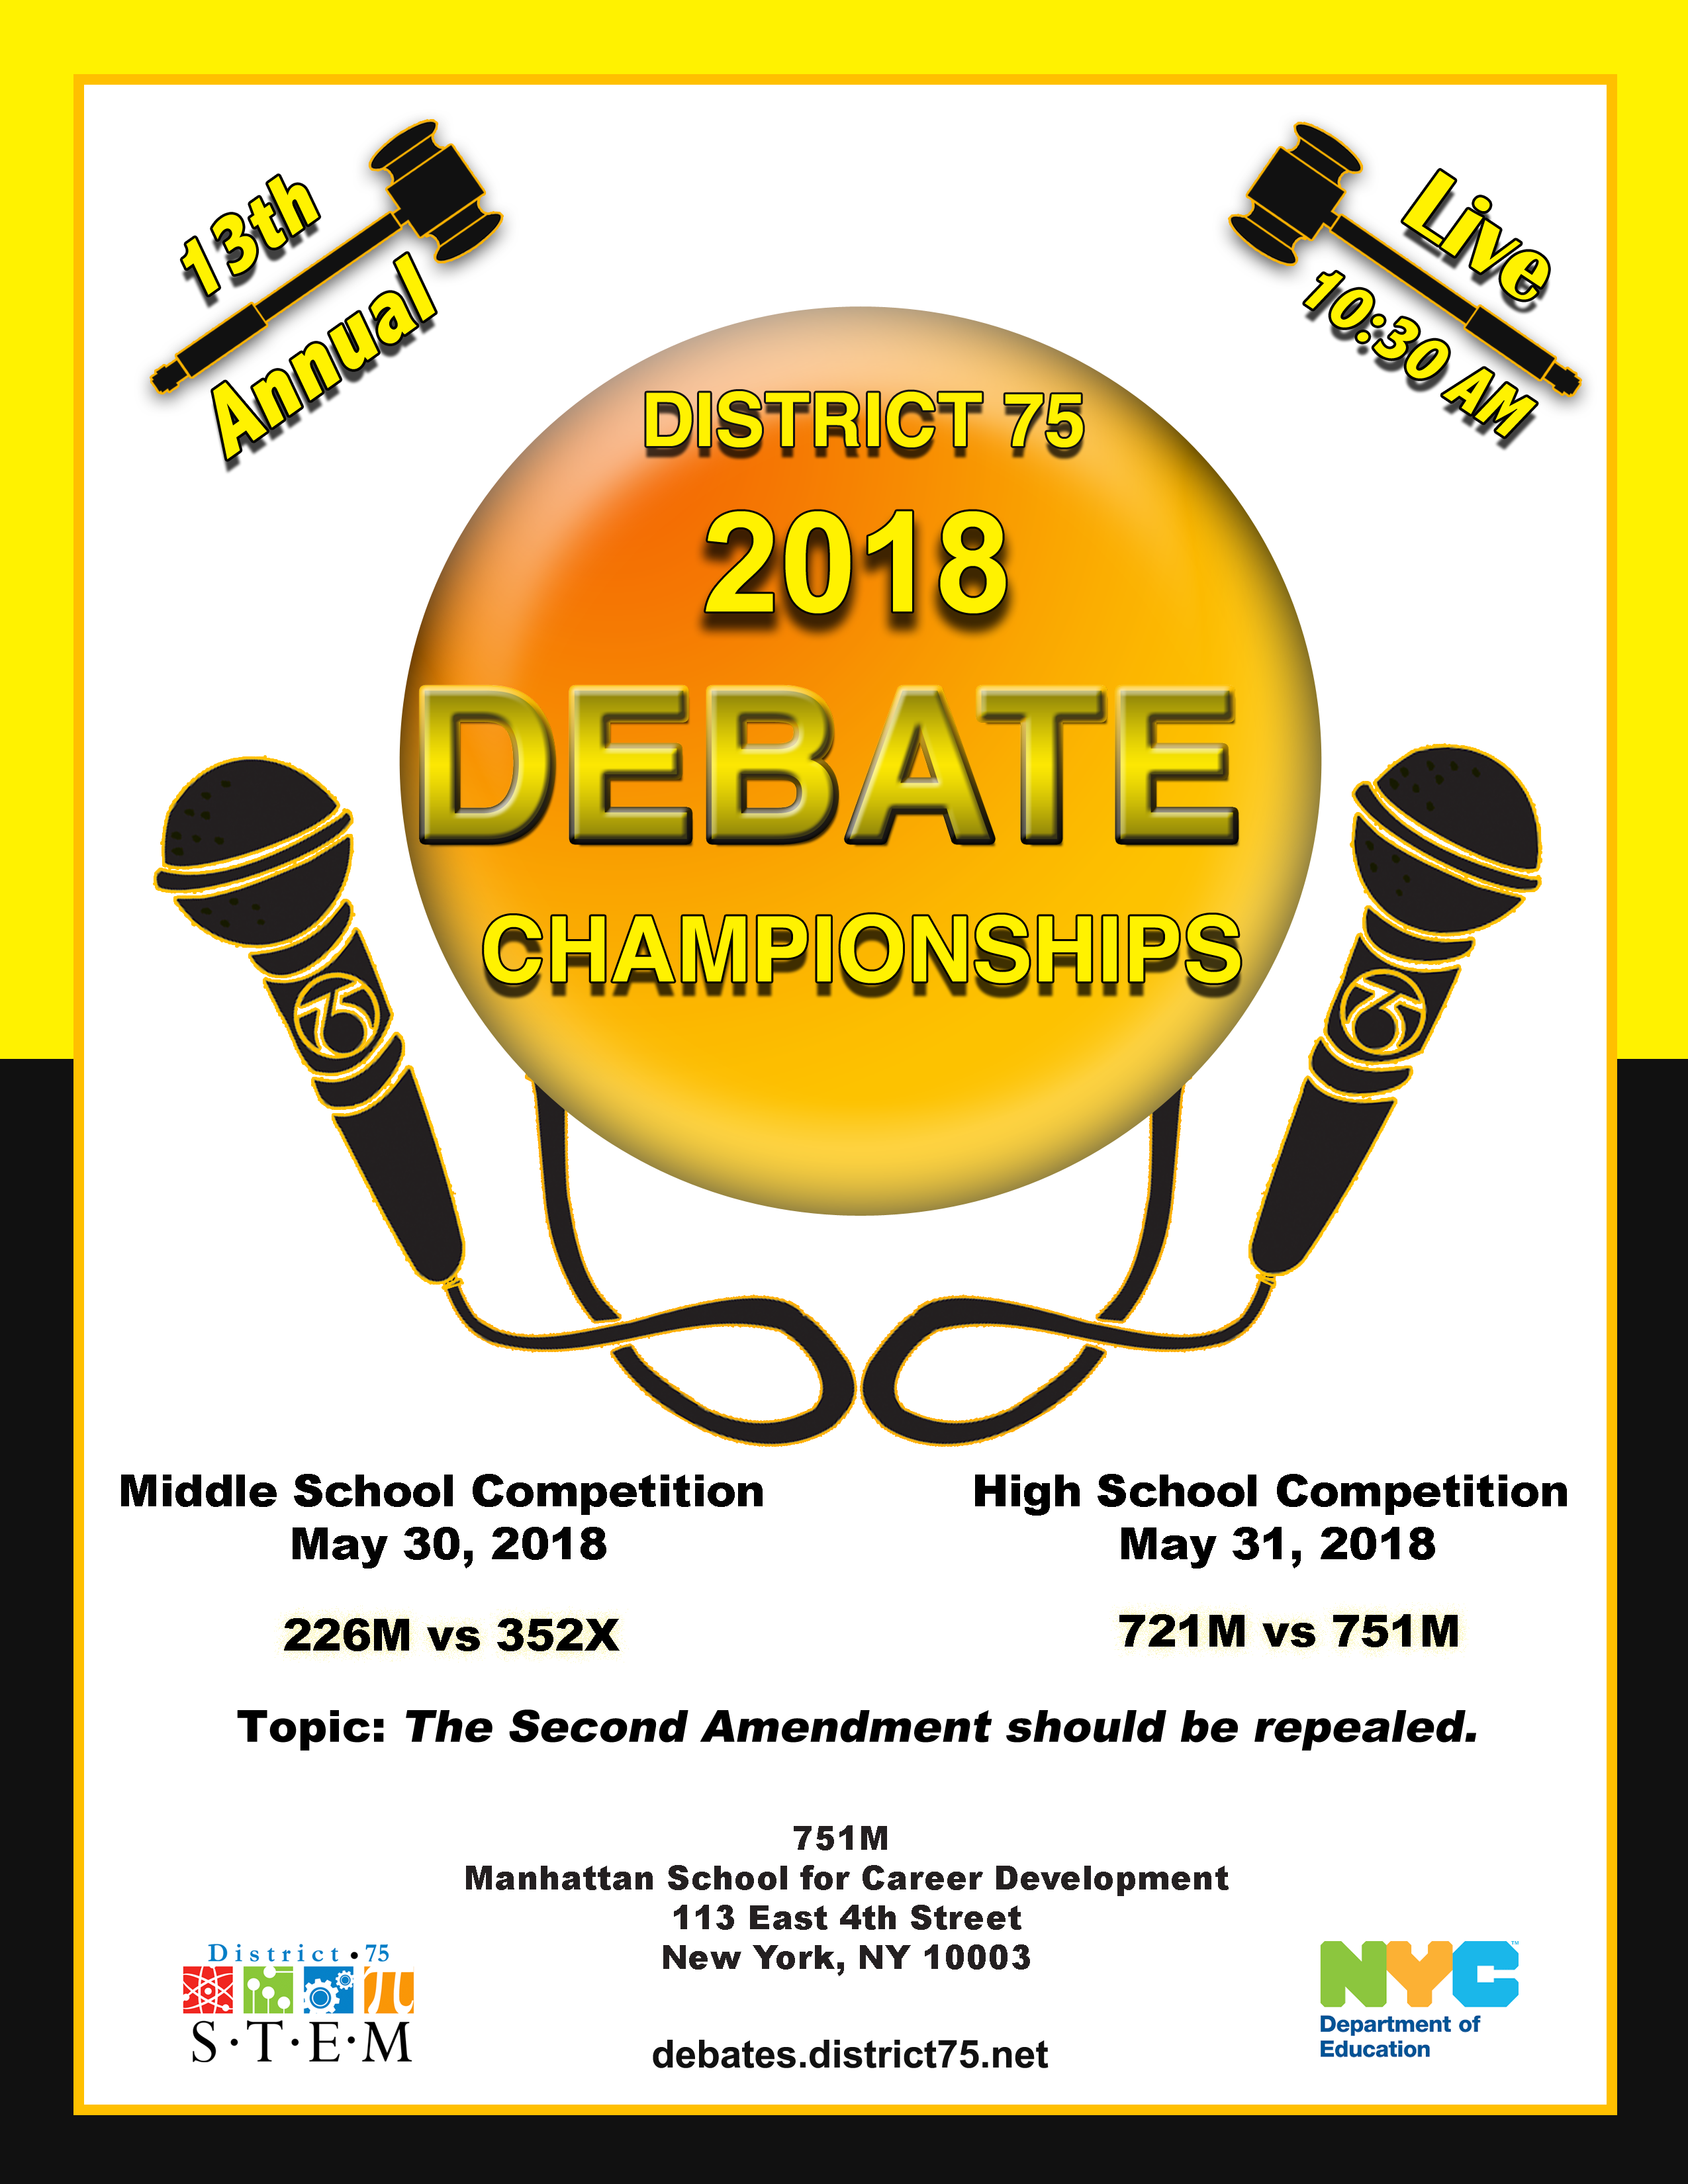 debate competition banner